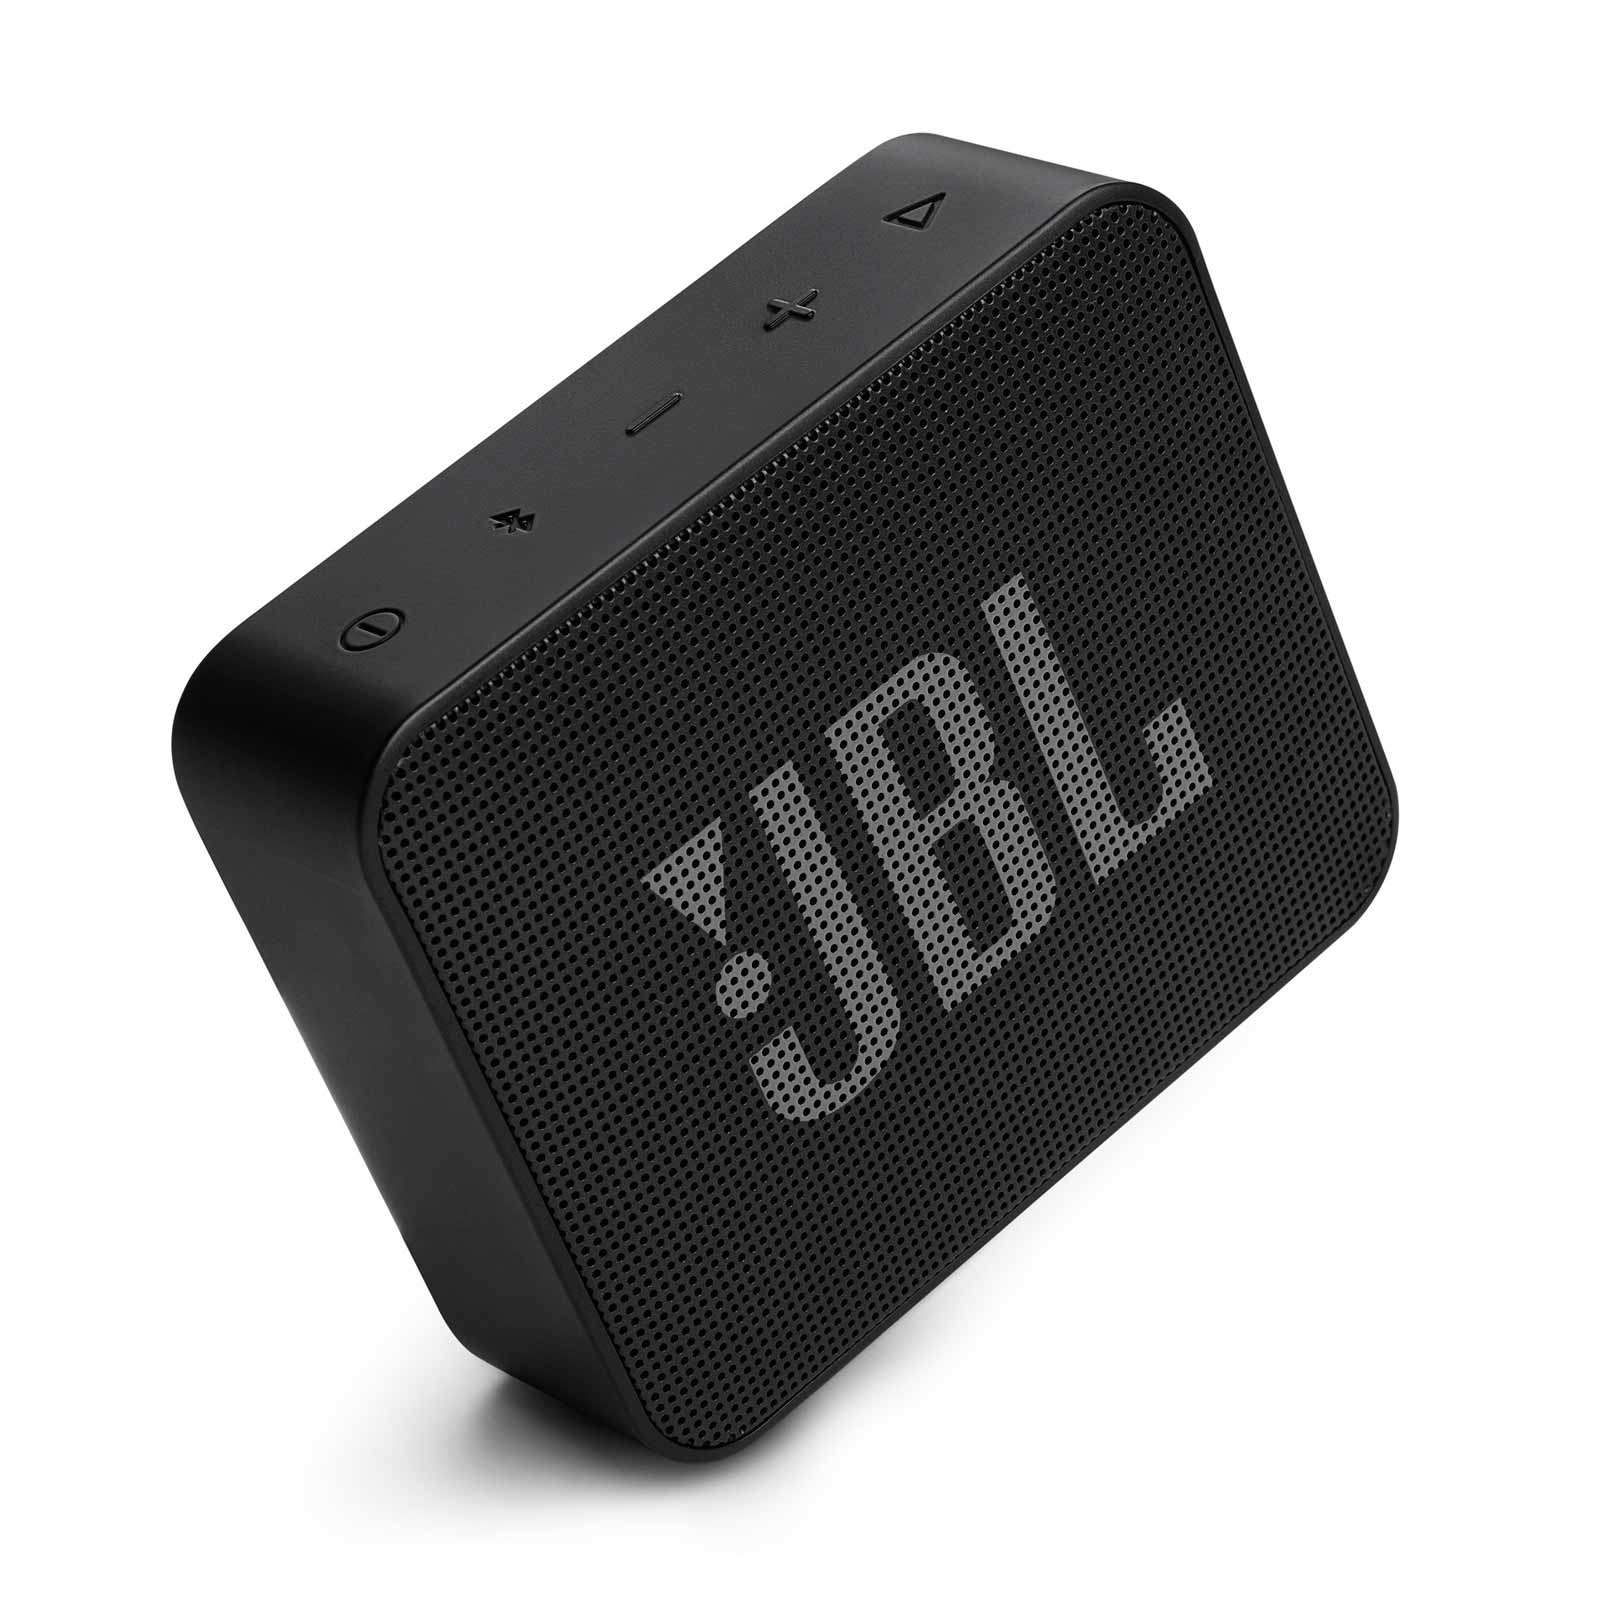 Parlante Jbl Clip 4 Red